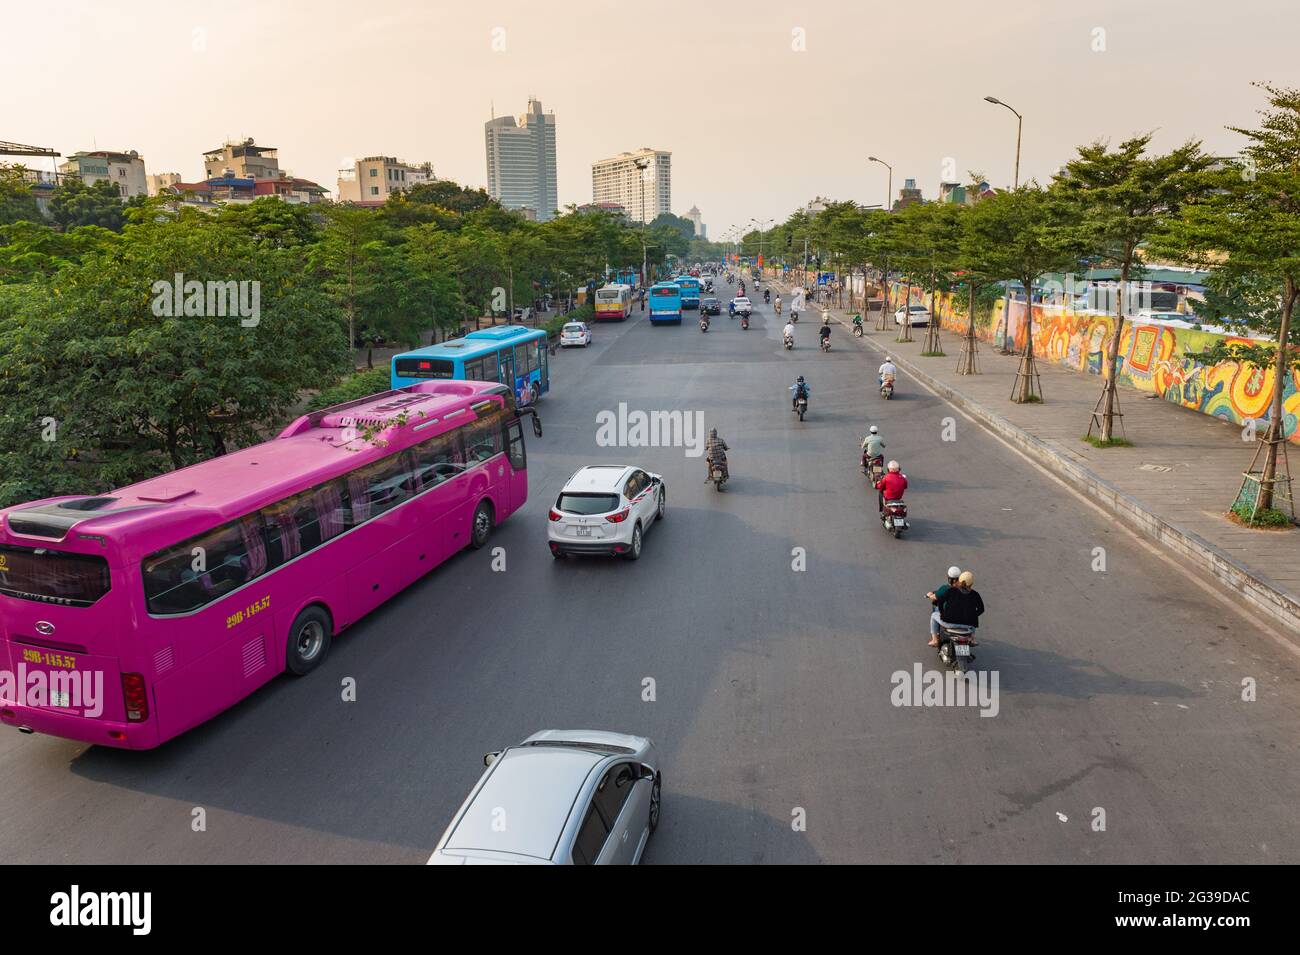 A busy unmarked road with cars buses and motocycles in Hanoi, Vietnam Stock Photo